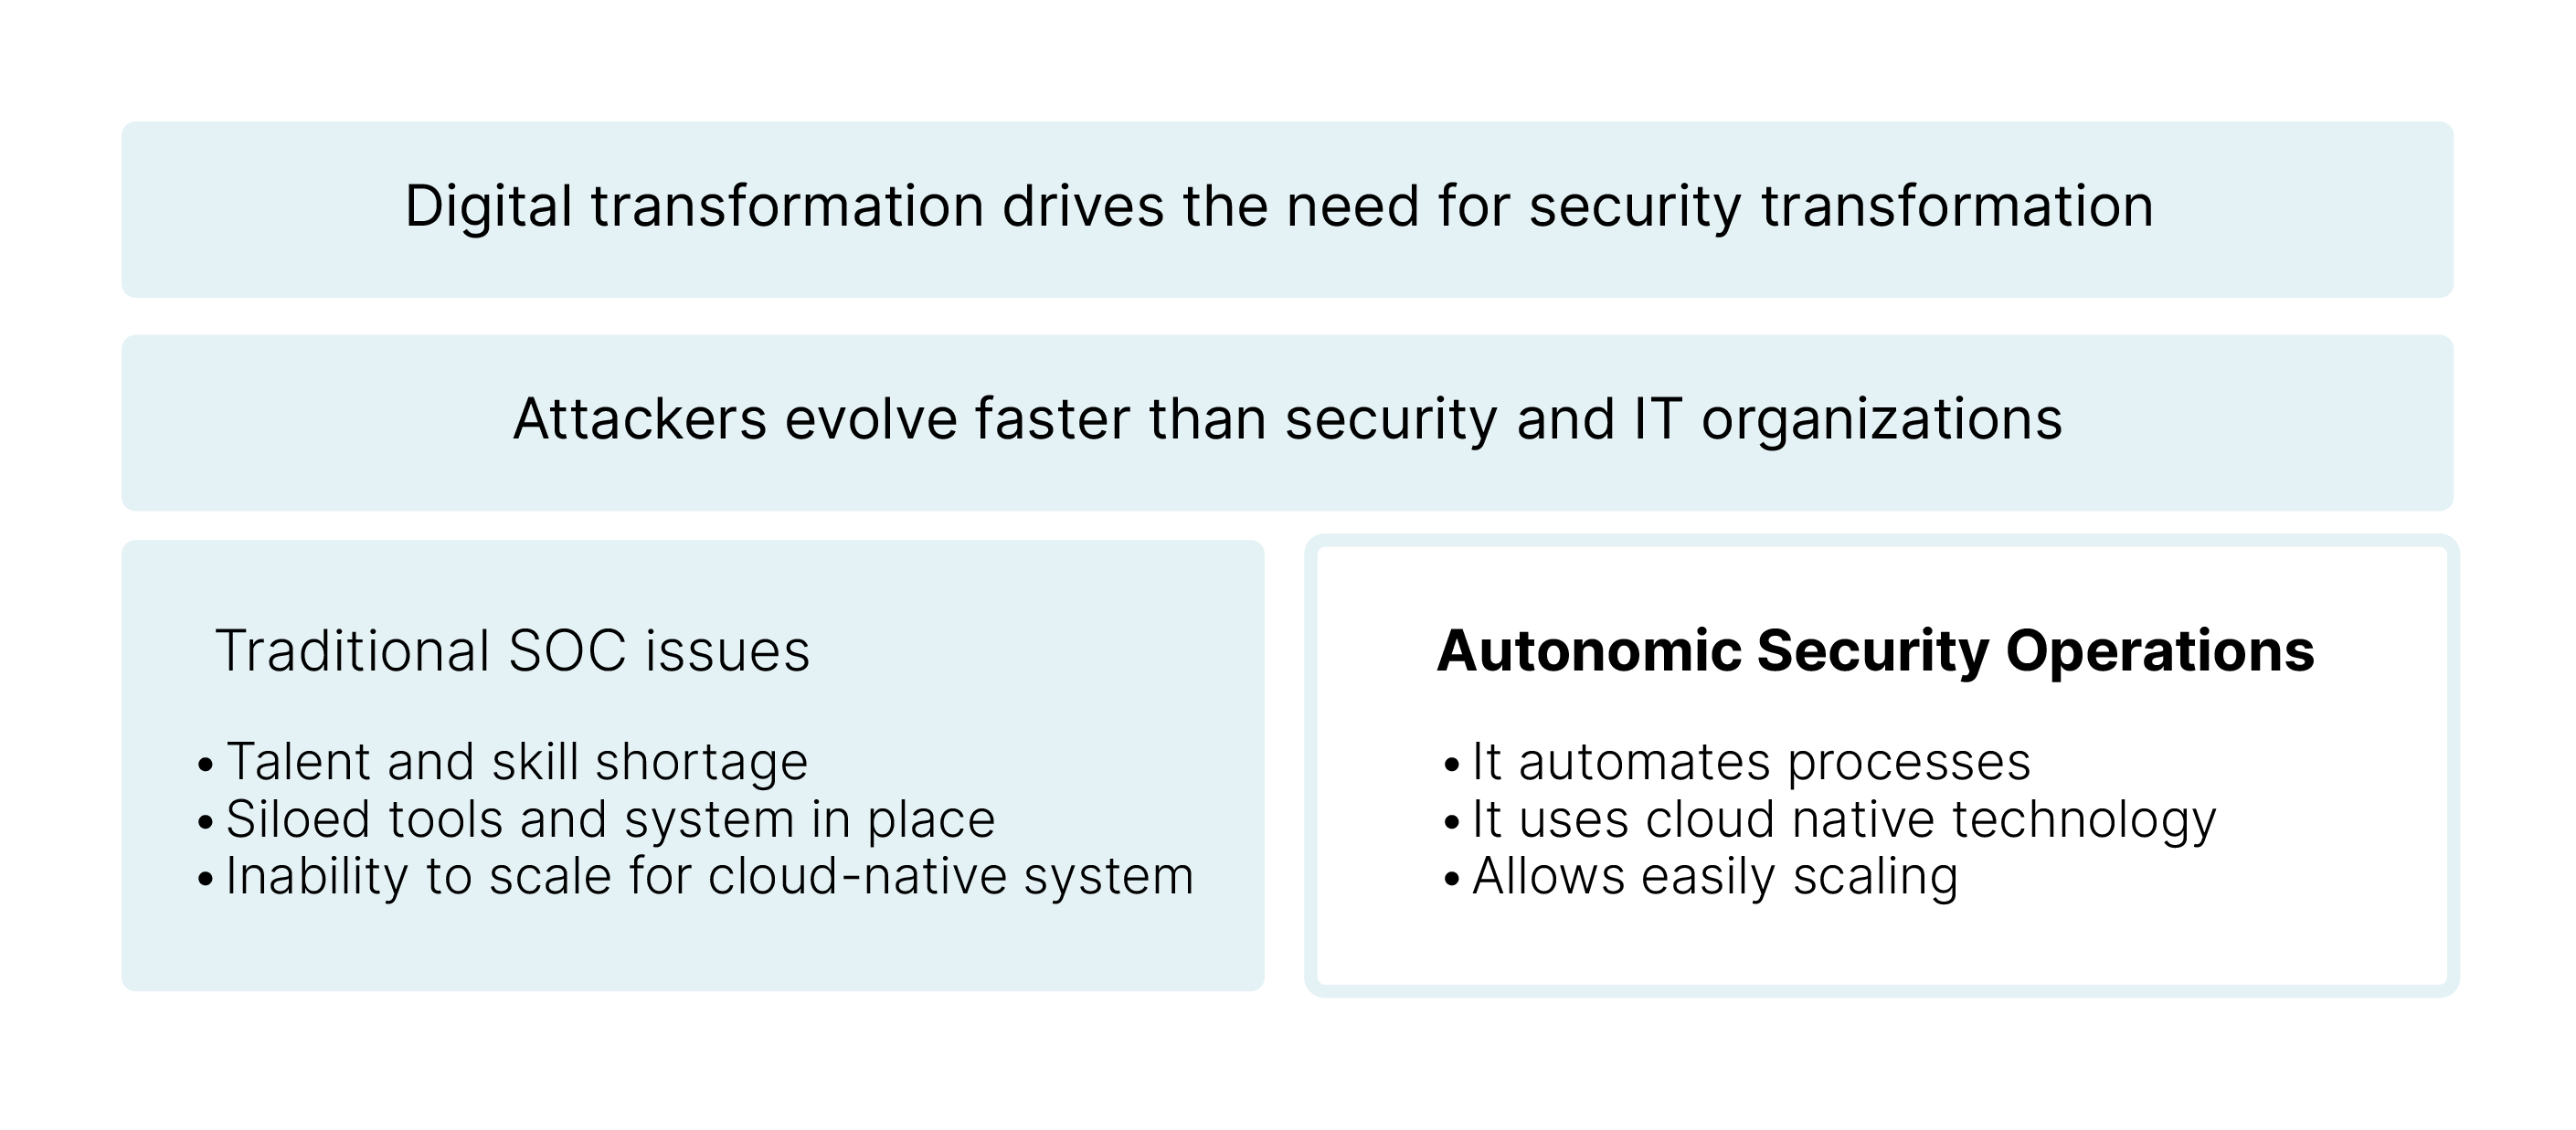 Autonomic Security Operations for digital transformation